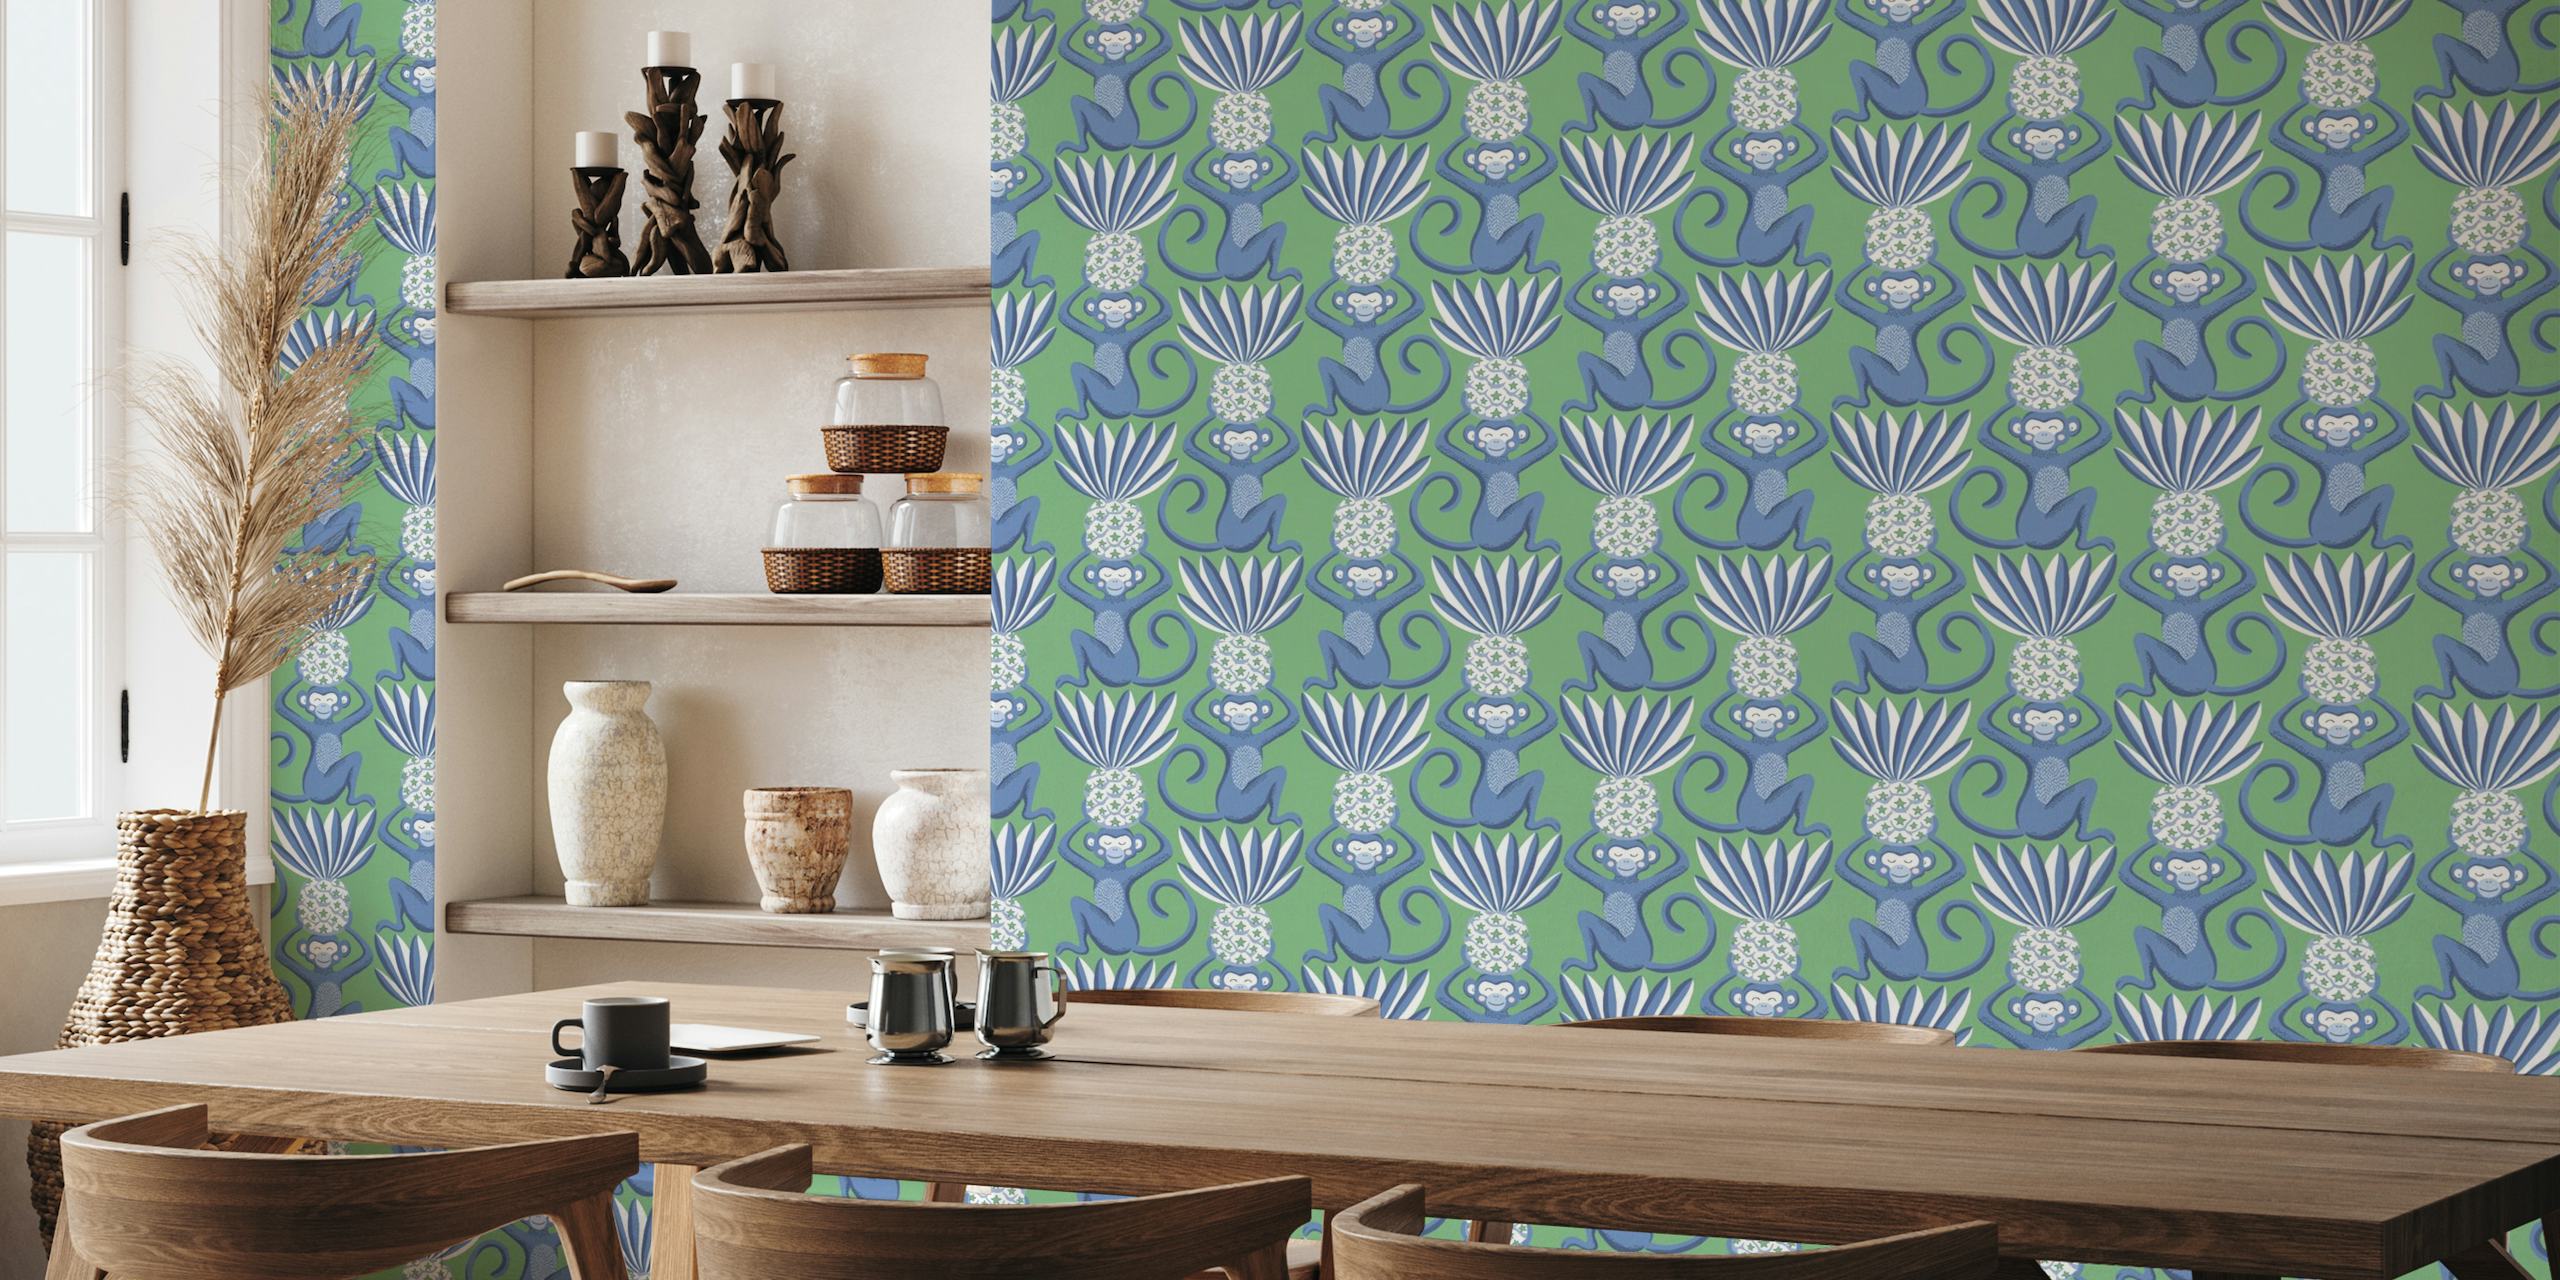 Monkeys and pineapples - blue and green carta da parati